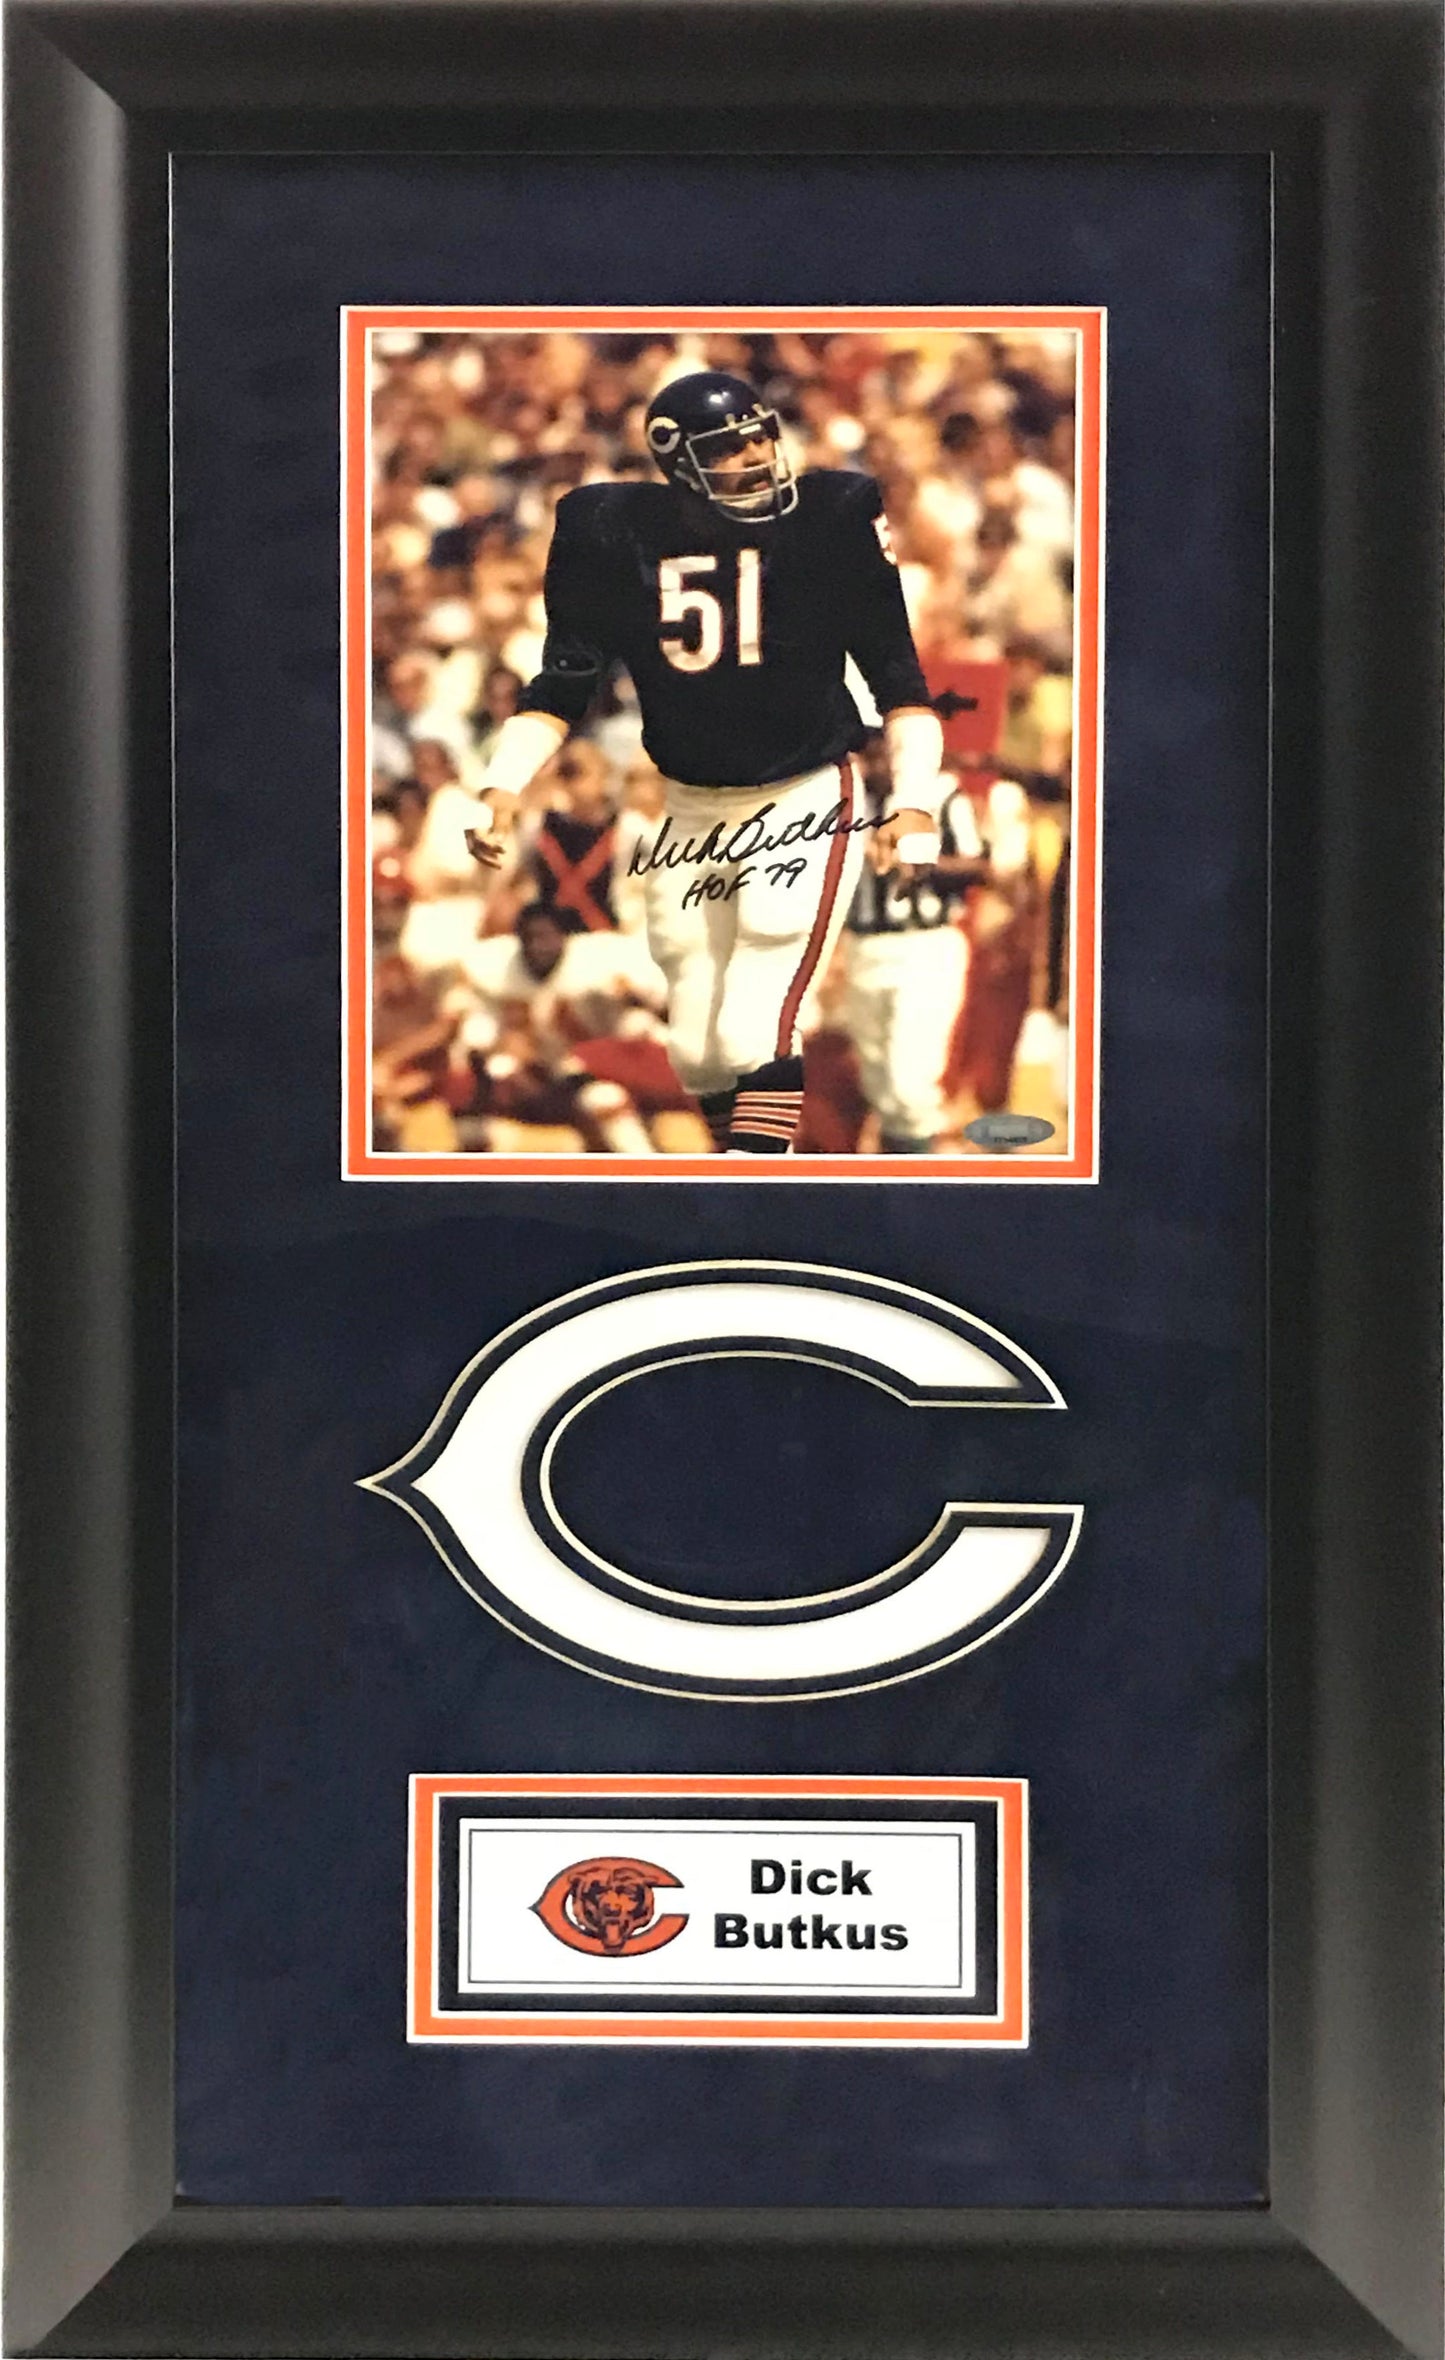 Dick Butkus Chicago Bears Autographed 8"x10" Framed Photo